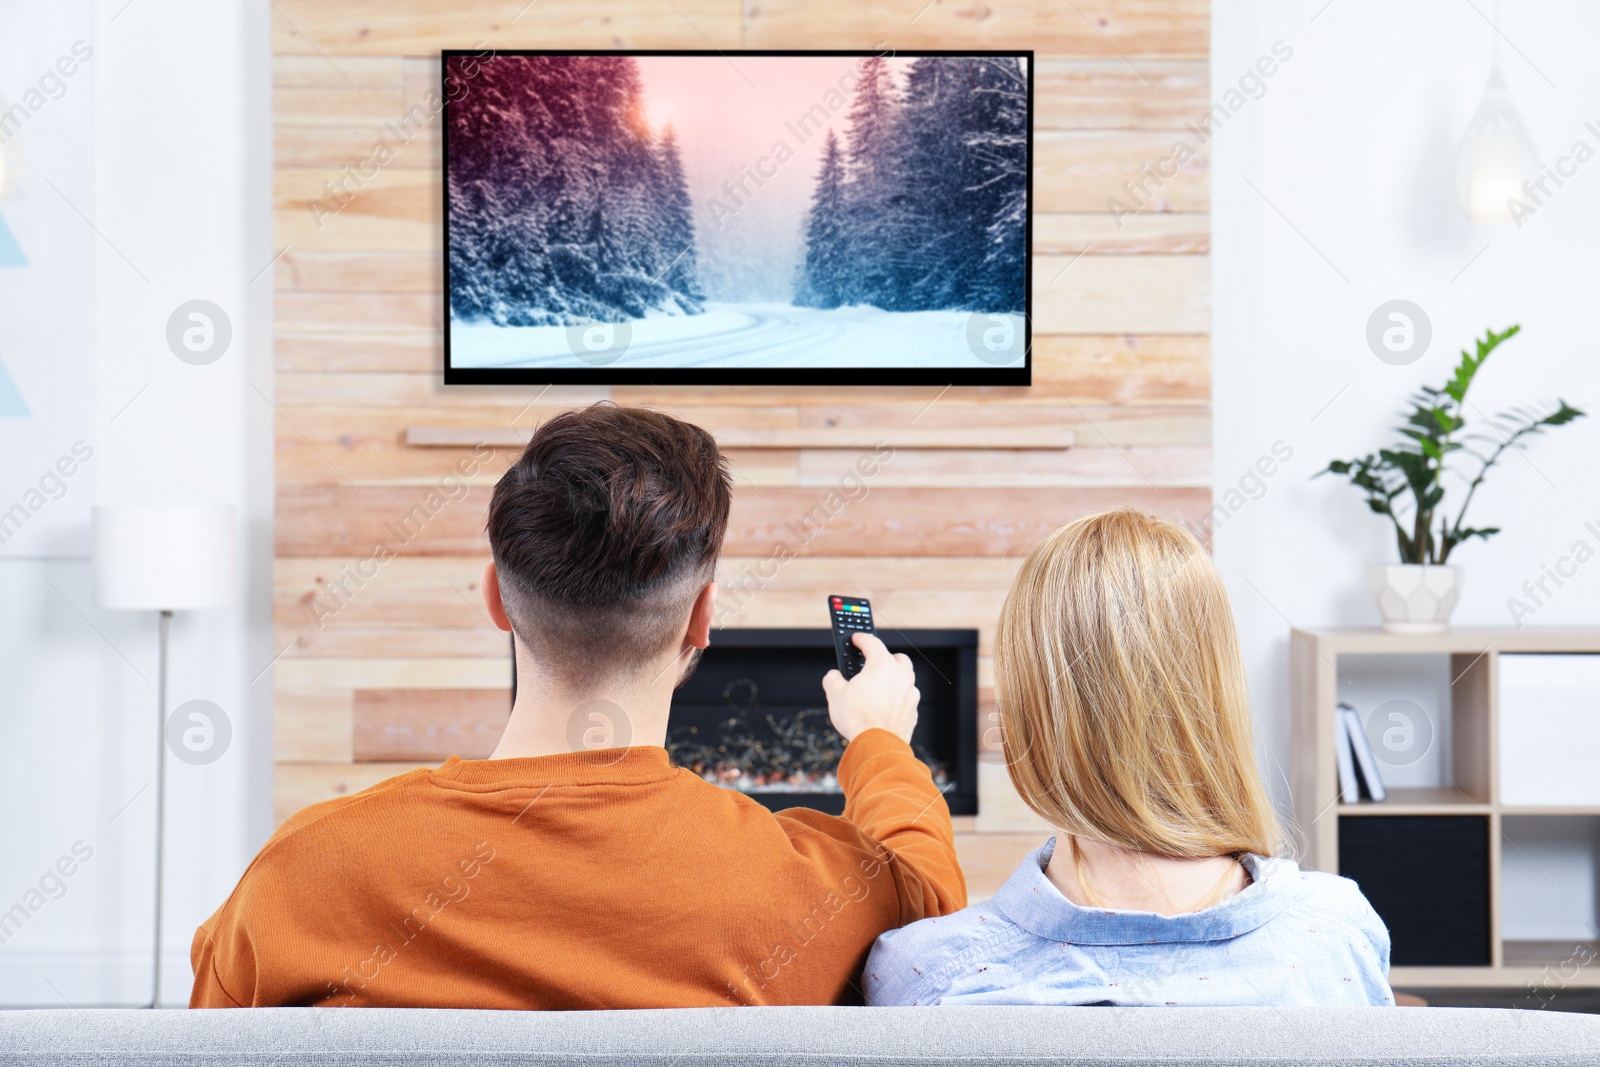 Image of Couple watching TV on sofa in living room with decorative fireplace